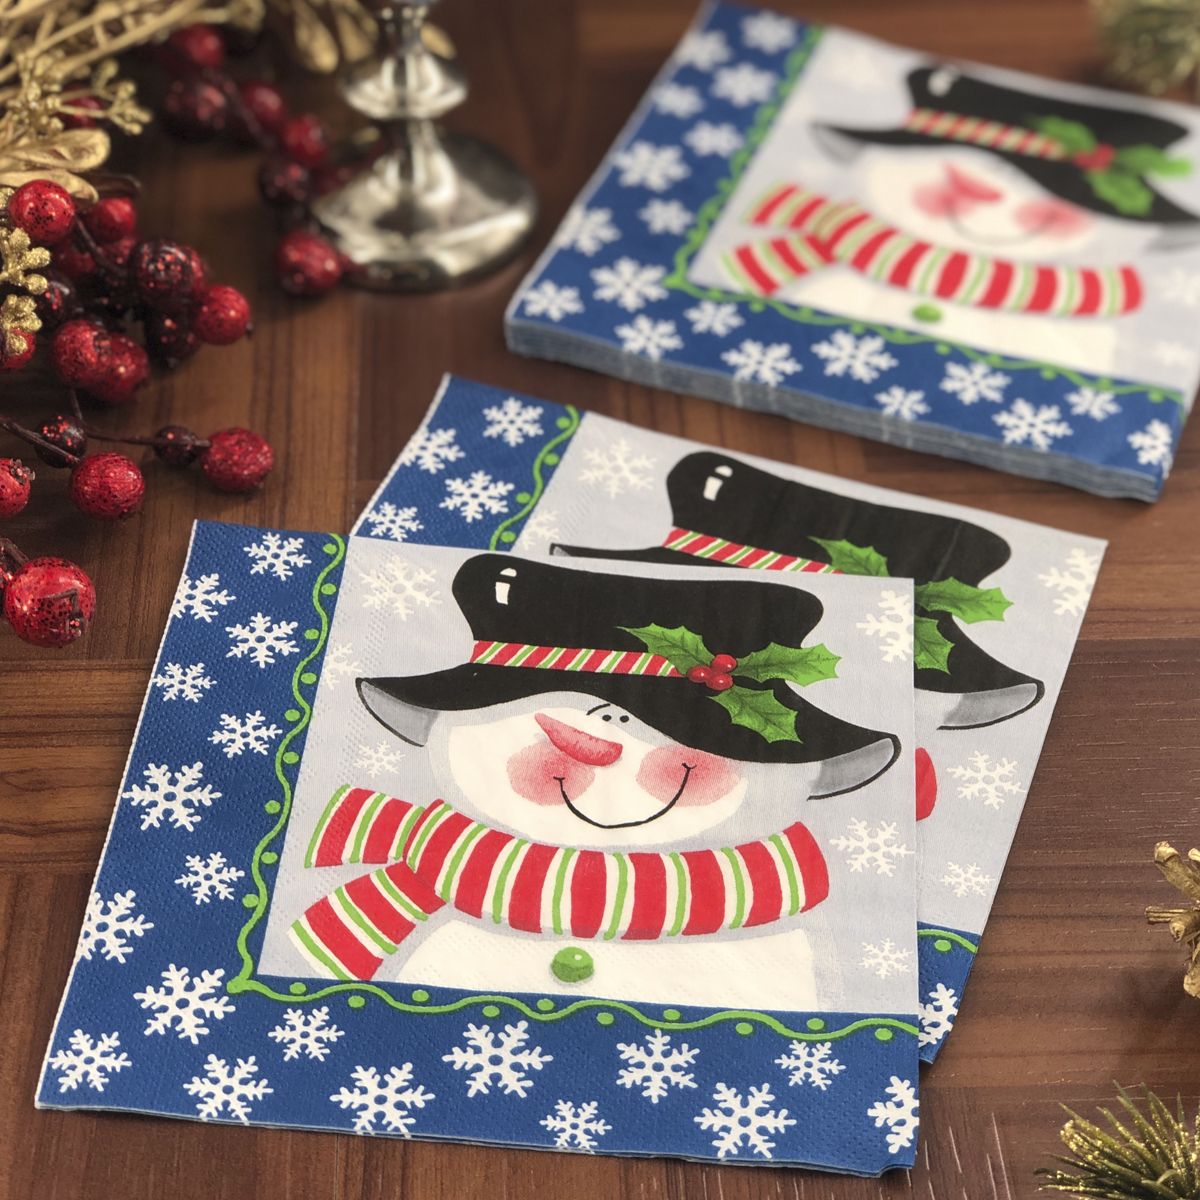 Paper Holiday Party Napkins Household Supplies Disposable linen-like Holiday napkins fancy disposable napkins heavy duty napkins classic elegant sturdy napkins reusable table setting catering high quality holiday napkins party decor